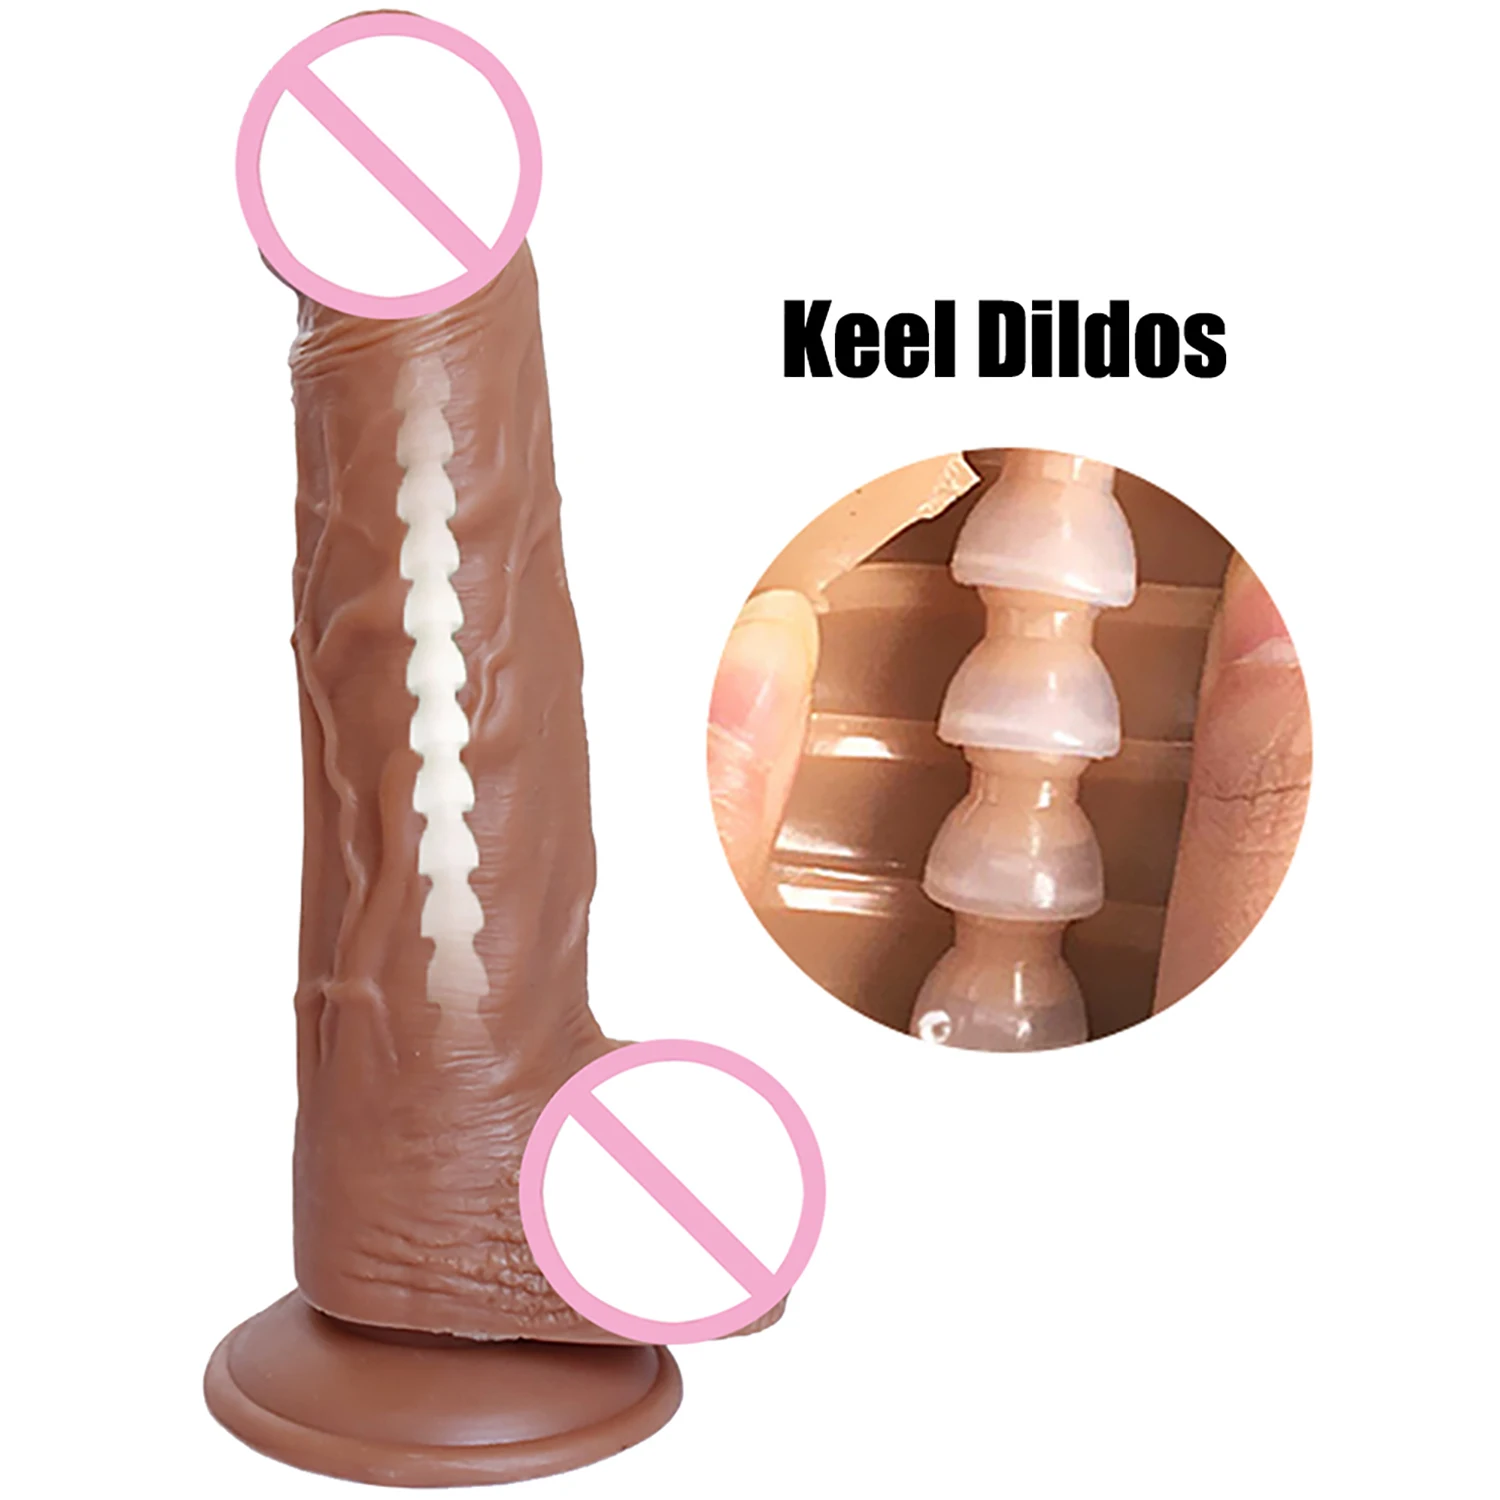 

Huge Realistic Keel Dildos with Suction Cup Soft Penis Thick Phallus Stimulate Vagina Anus Dick Sex Toy for Women Masturbation